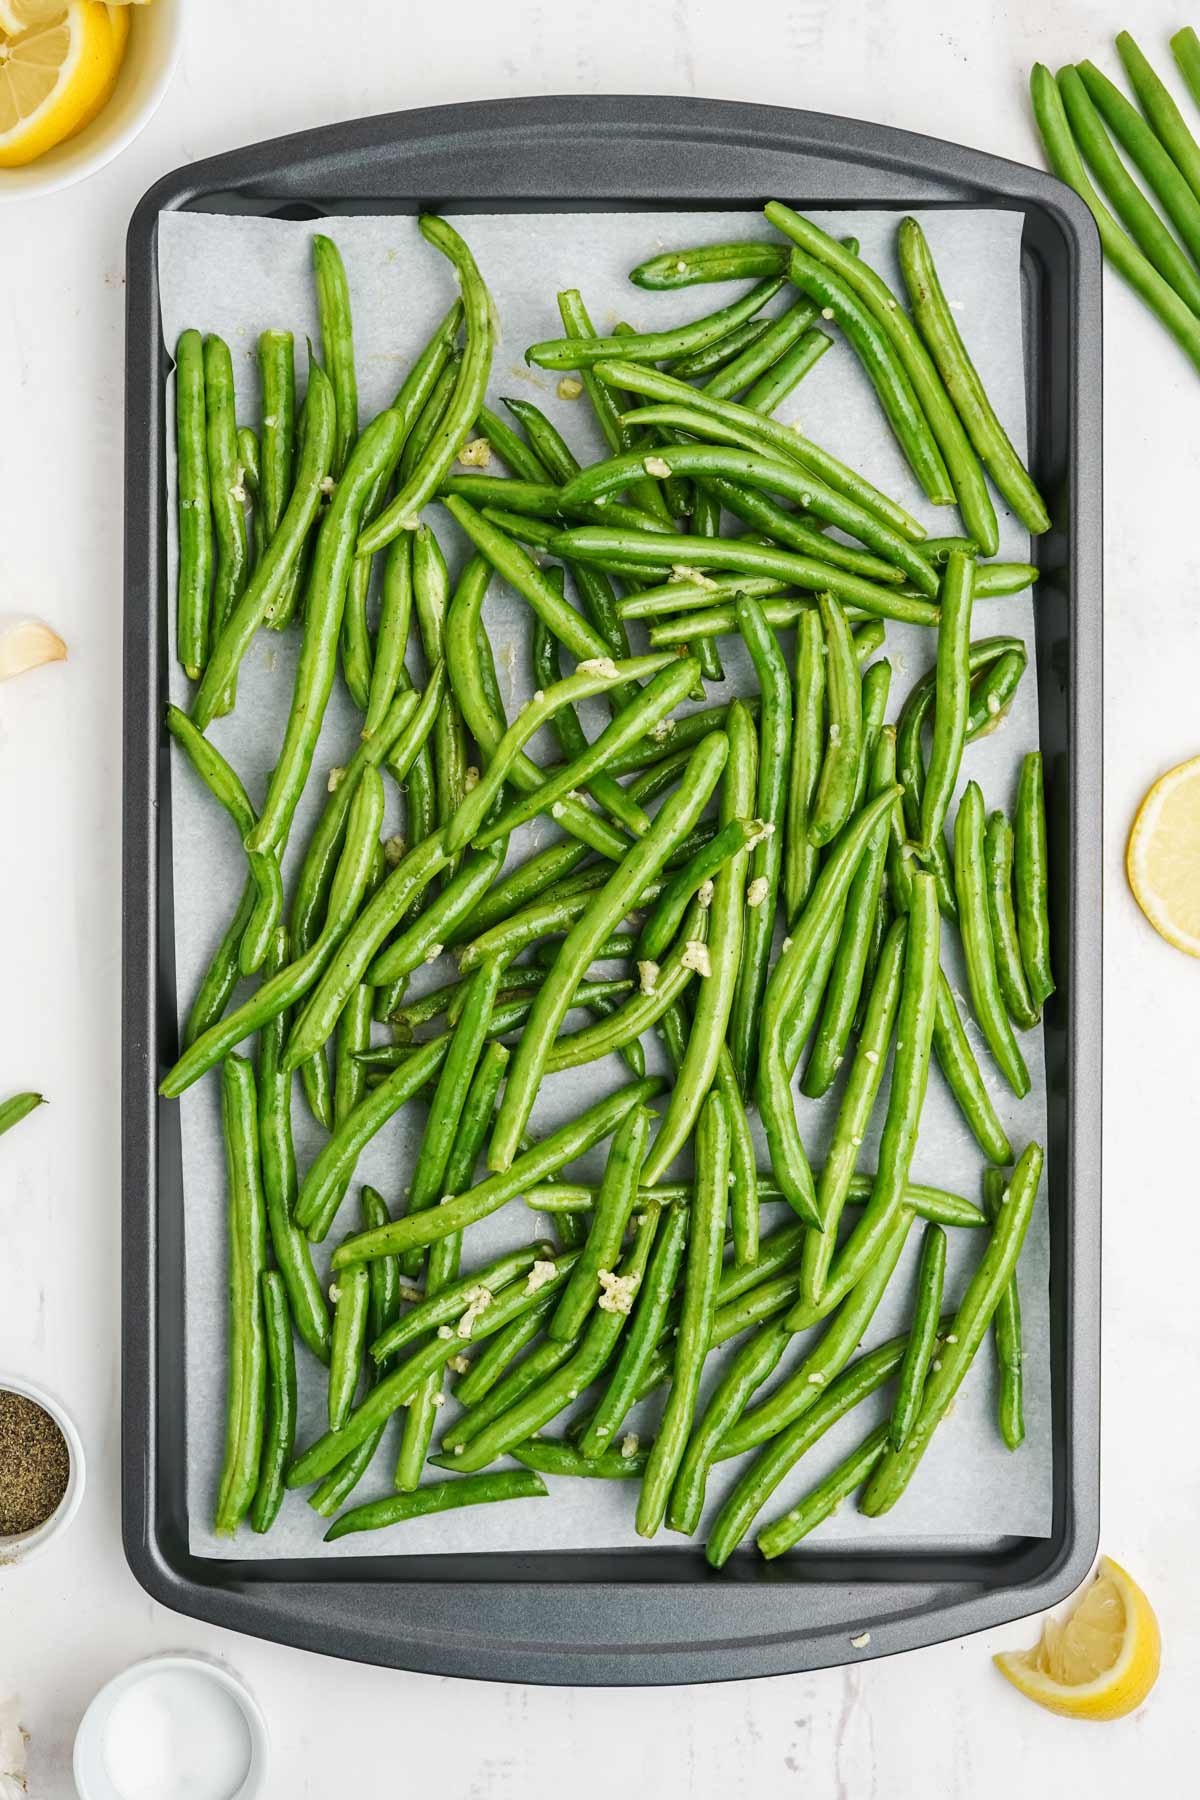 Green beans tossed in butter mixture spread out on a baking pan.